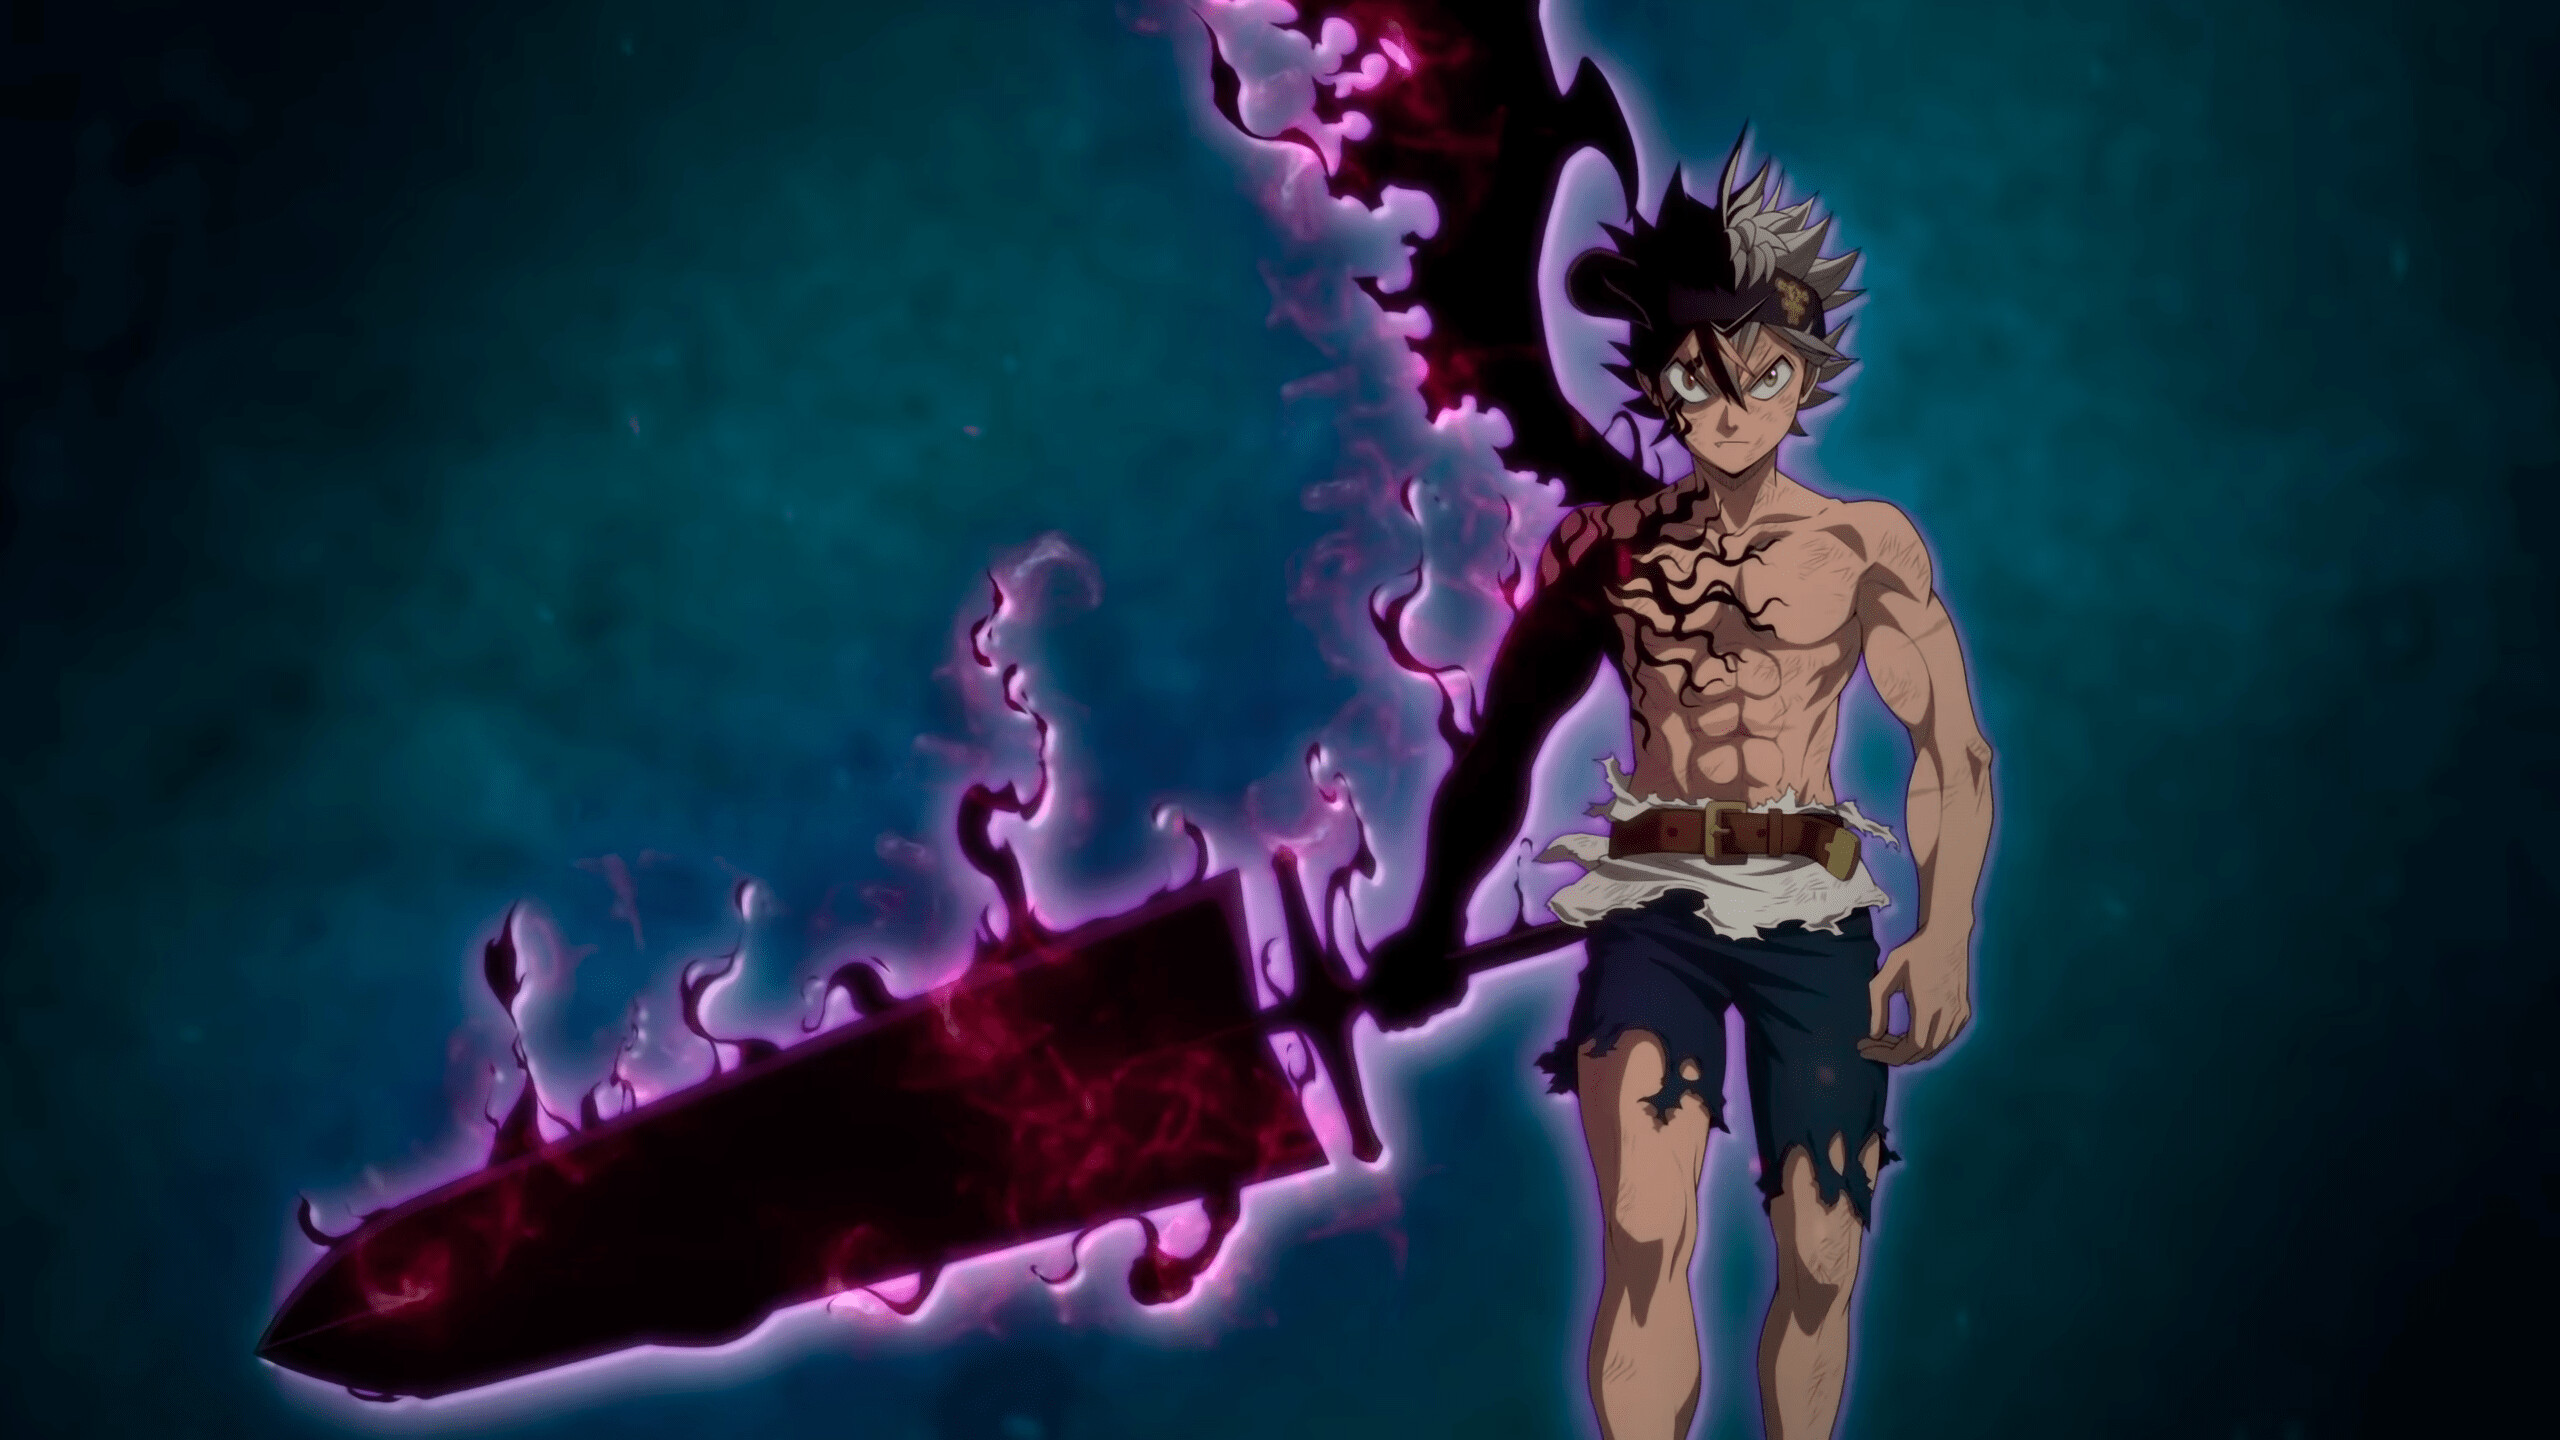 Black Clover: A fictional character and the main protagonist of the manga series created by Yuki Tabata. 2560x1440 HD Wallpaper.